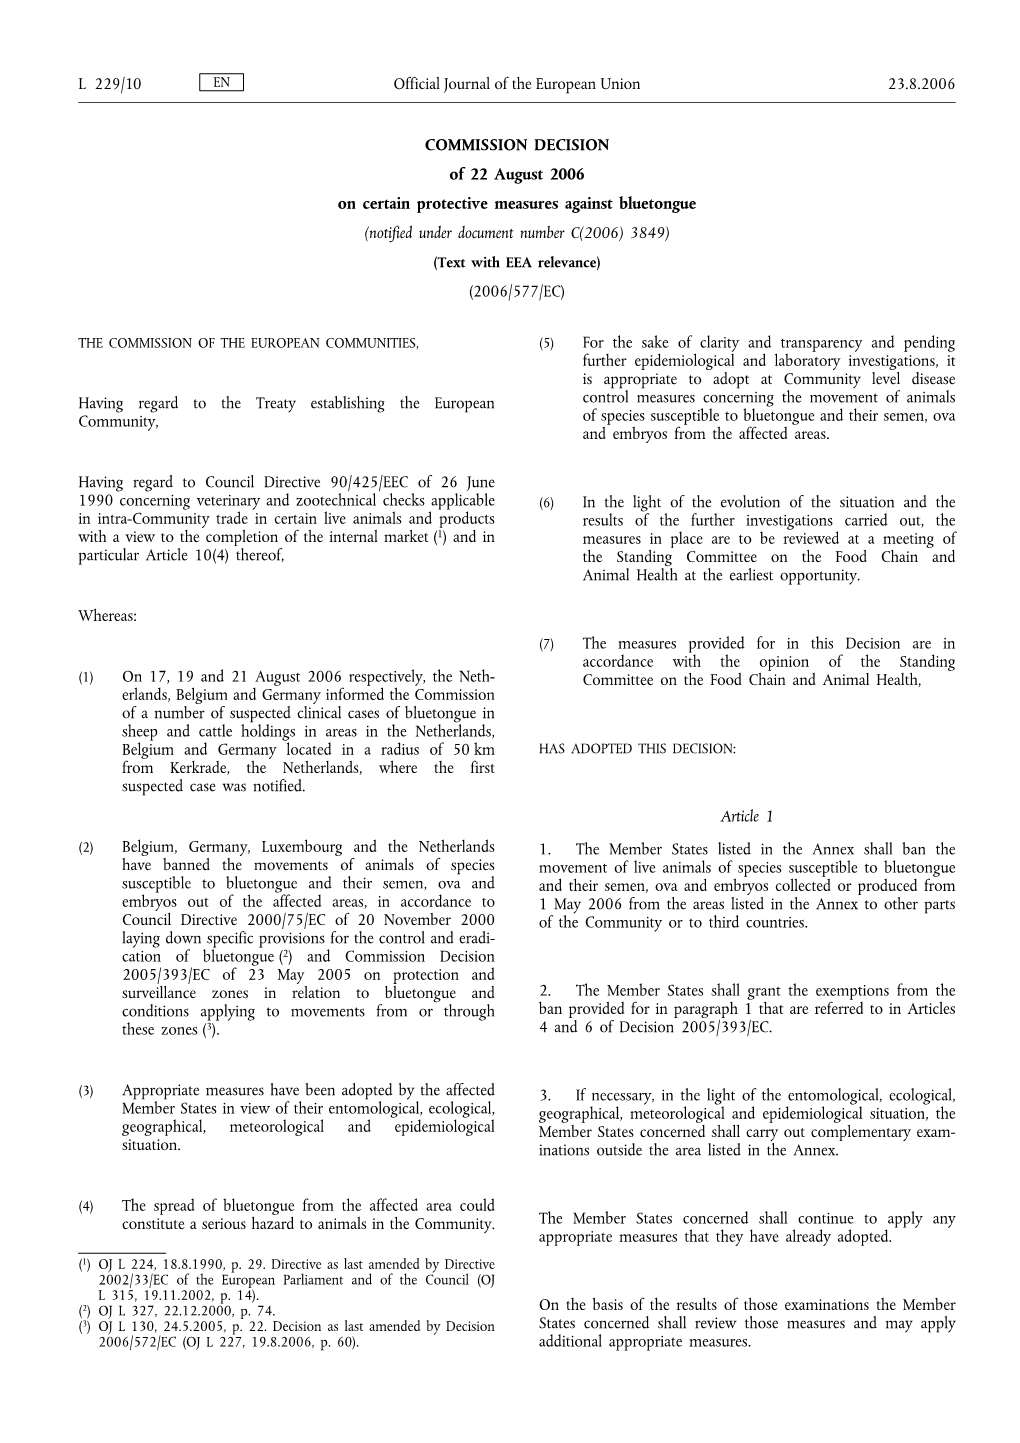 COMMISSION DECISION of 22 August 2006 on Certain Protective Measures Against Bluetongue (Notified Under Document Number C(2006) 3849)